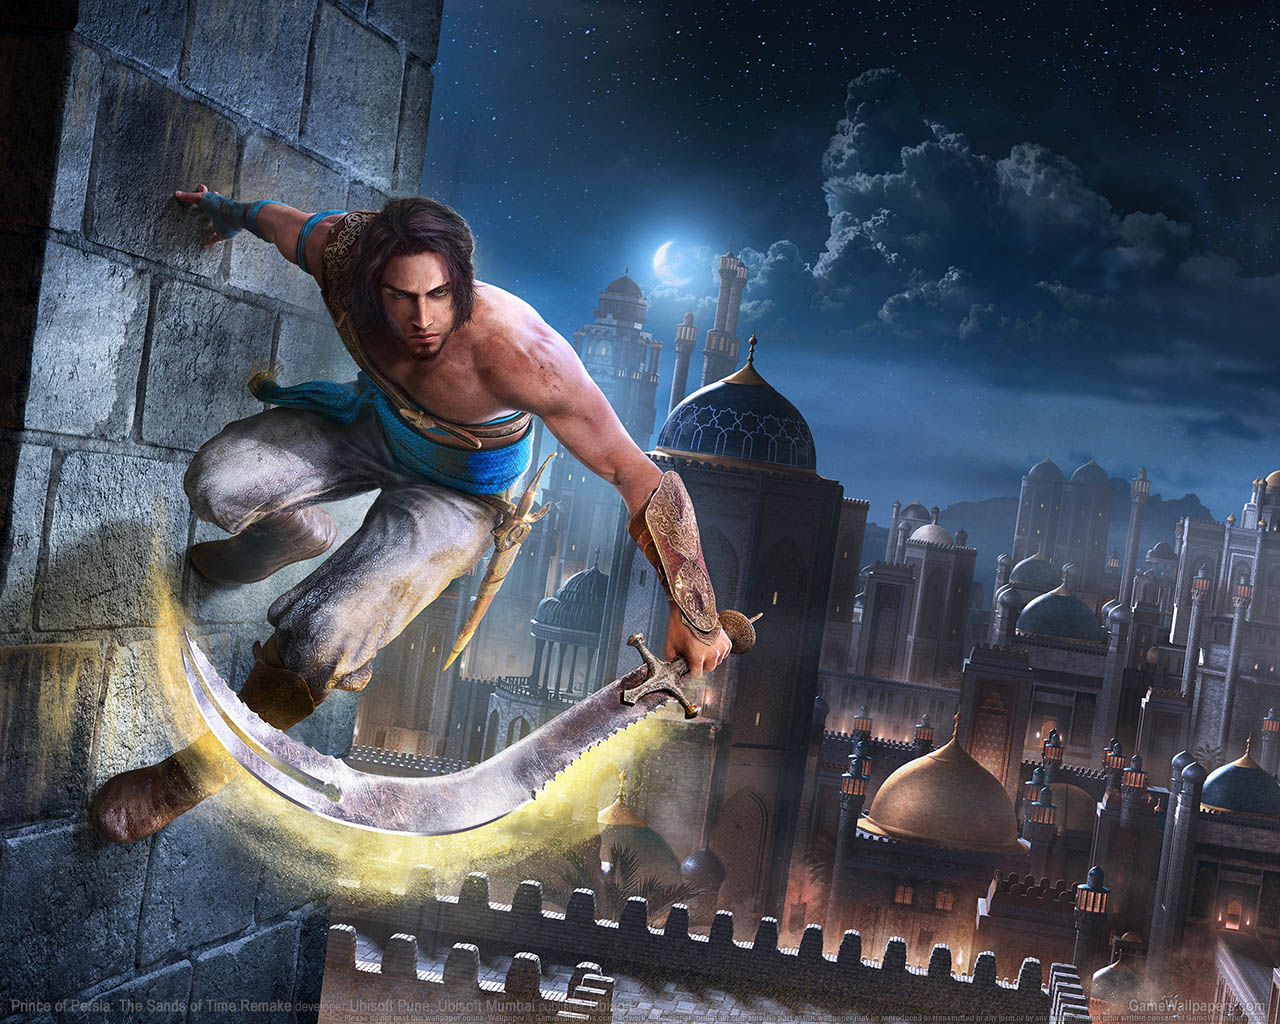 Prince of Persia: The Sands of Time Remake achtergrond 01 1280x1024